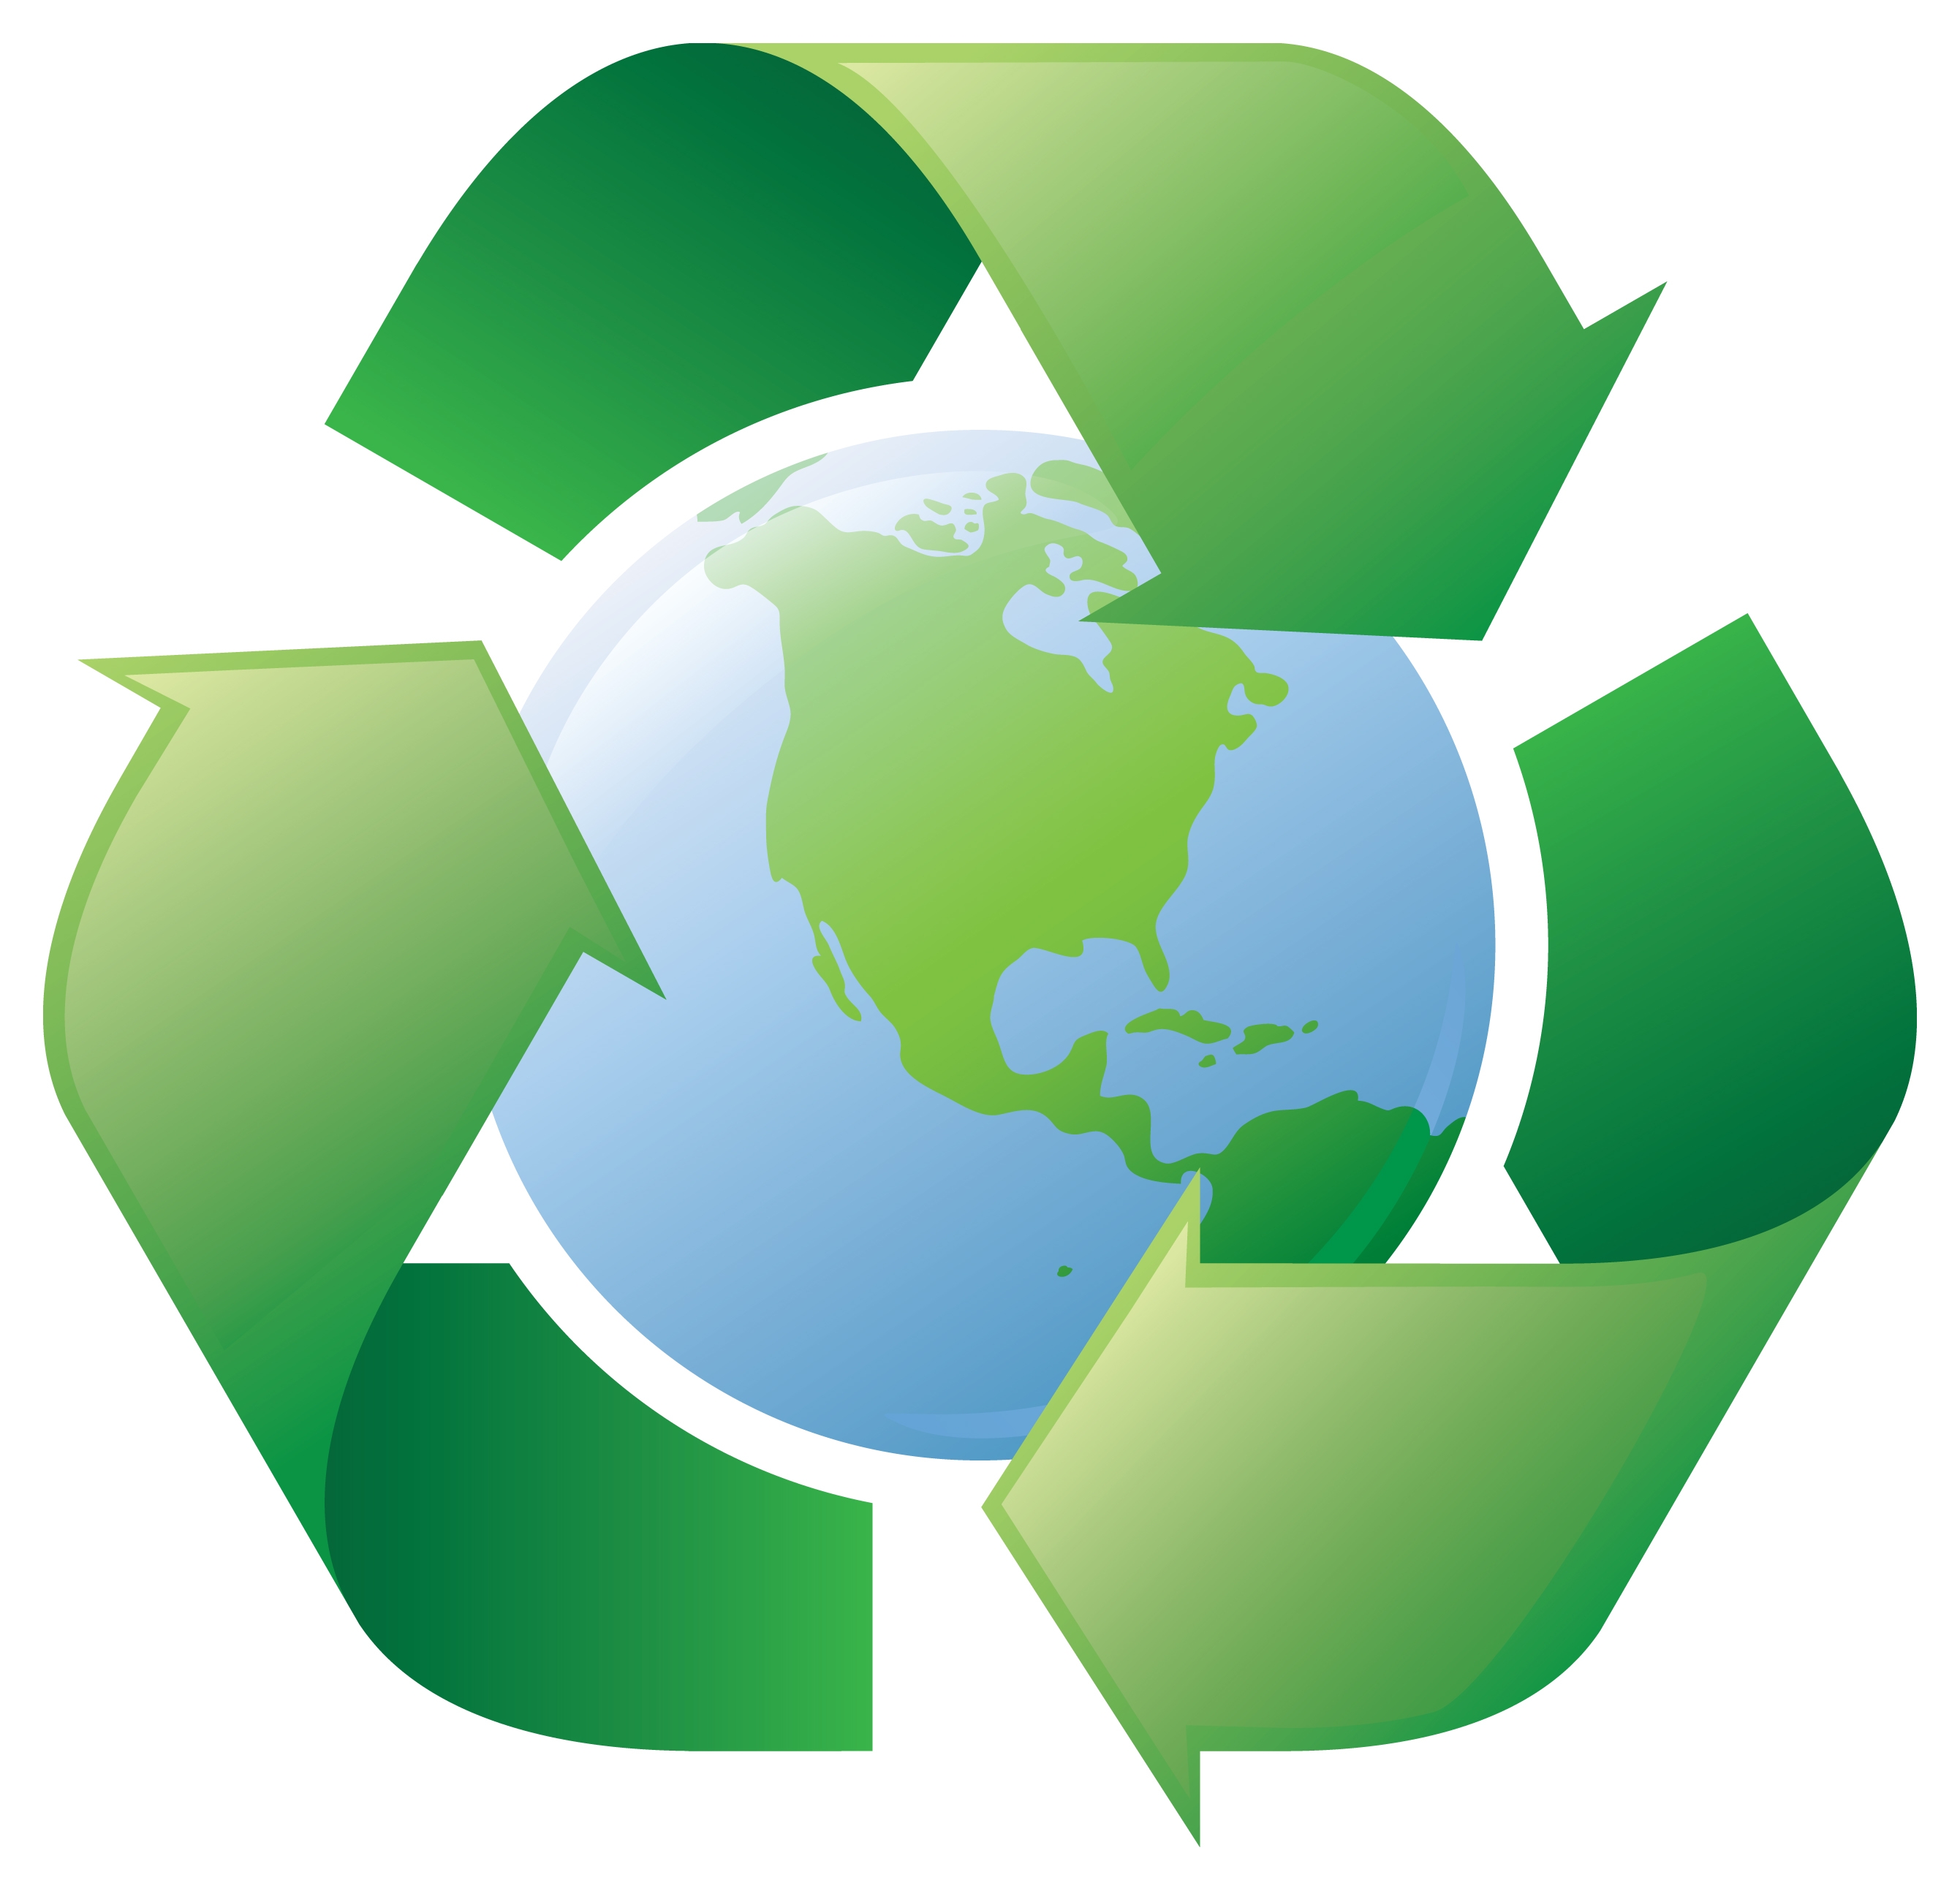 Aim to Recycle Recycling Waste Management 2016 Recycling Certificate